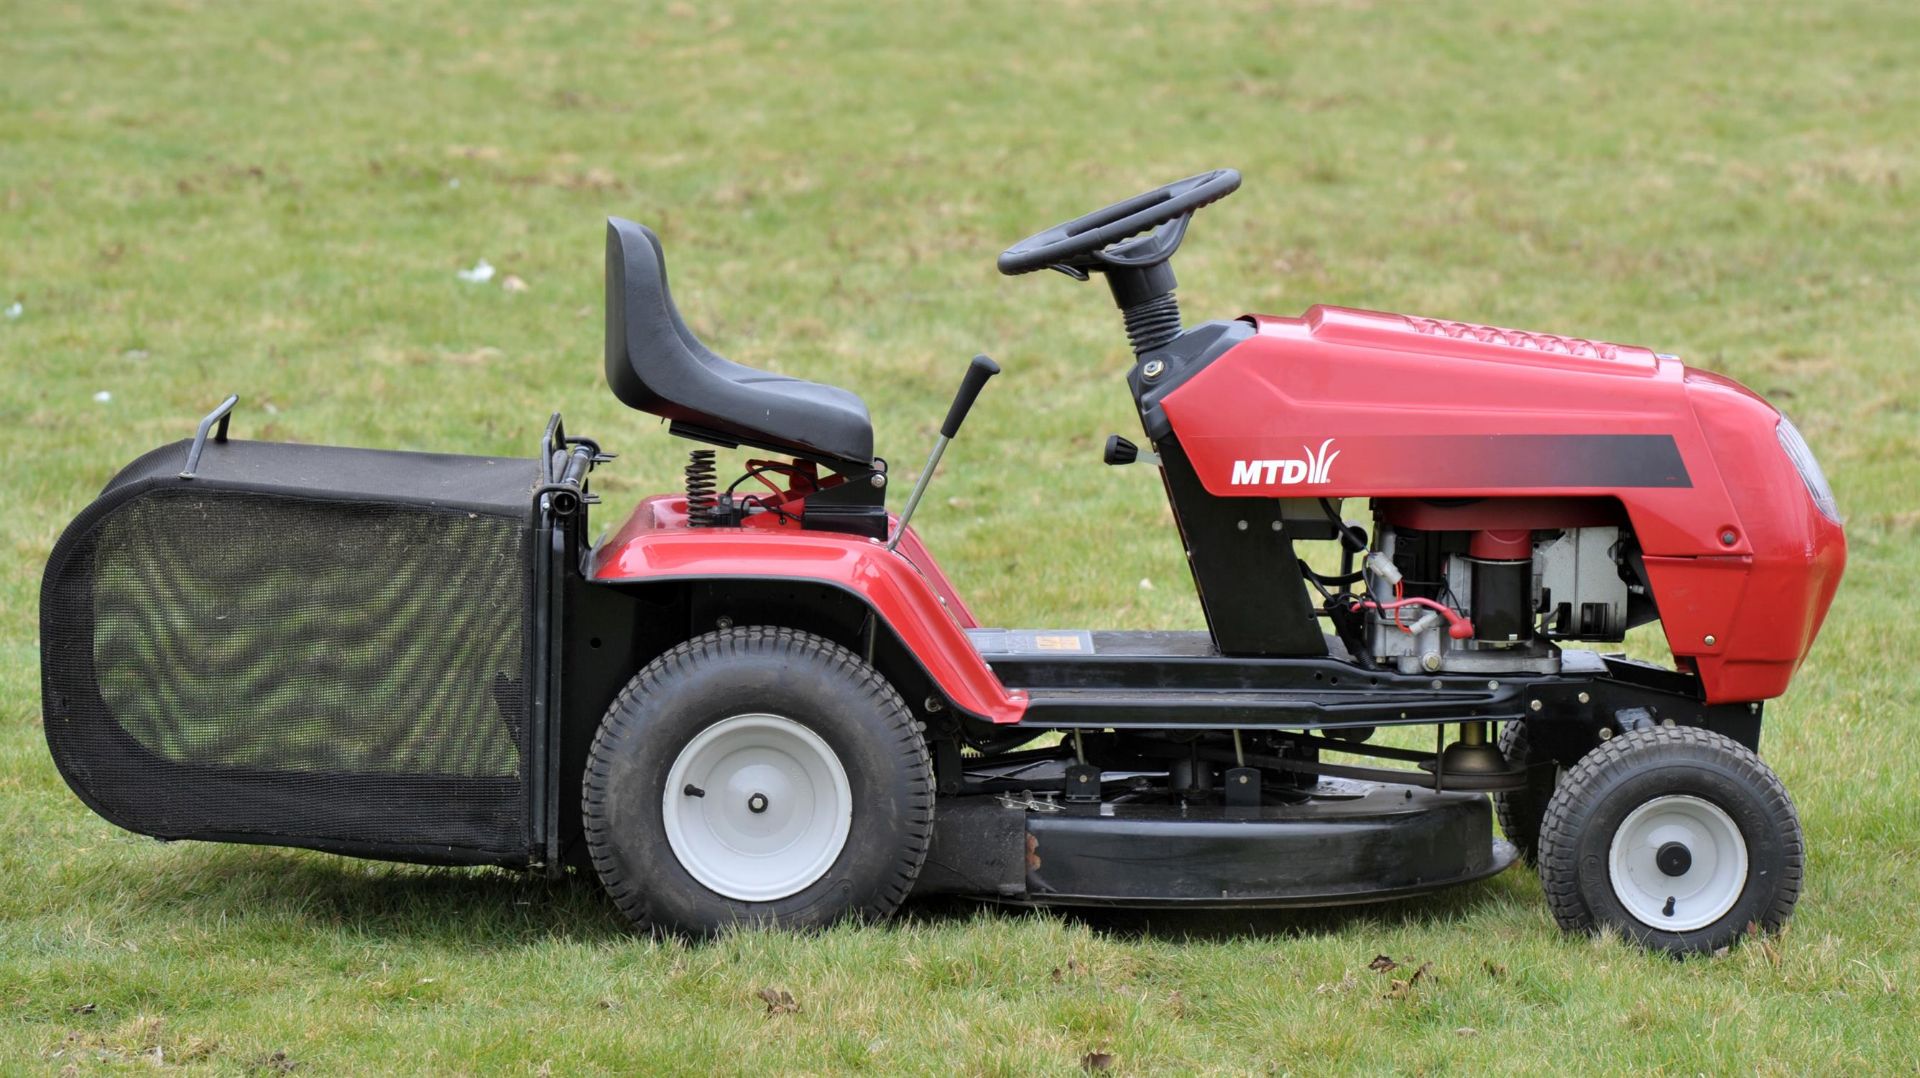 MTD Spider 76 RD Ride on Garden lawn mower. It comes with a grass collection box. - Image 14 of 14